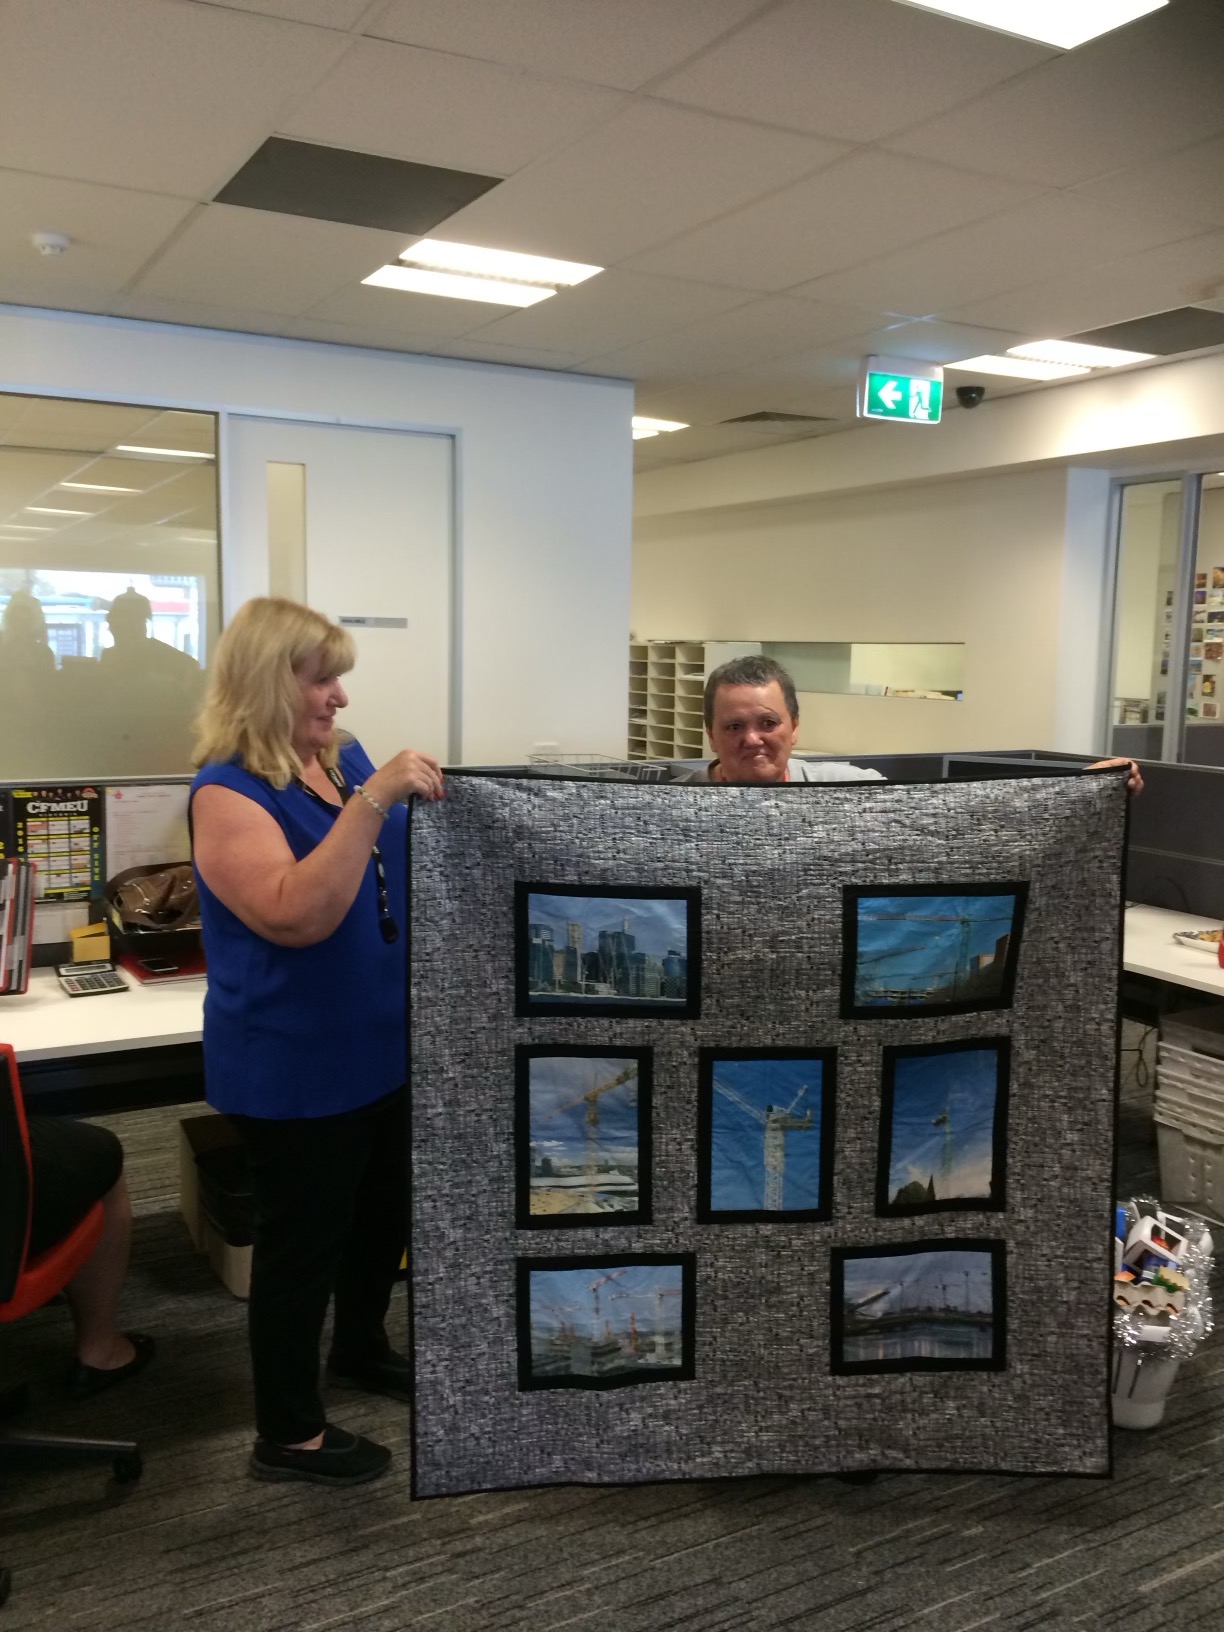 Edna, a life member of the CFMEU, on the right getting her favourite possession her crane quilt